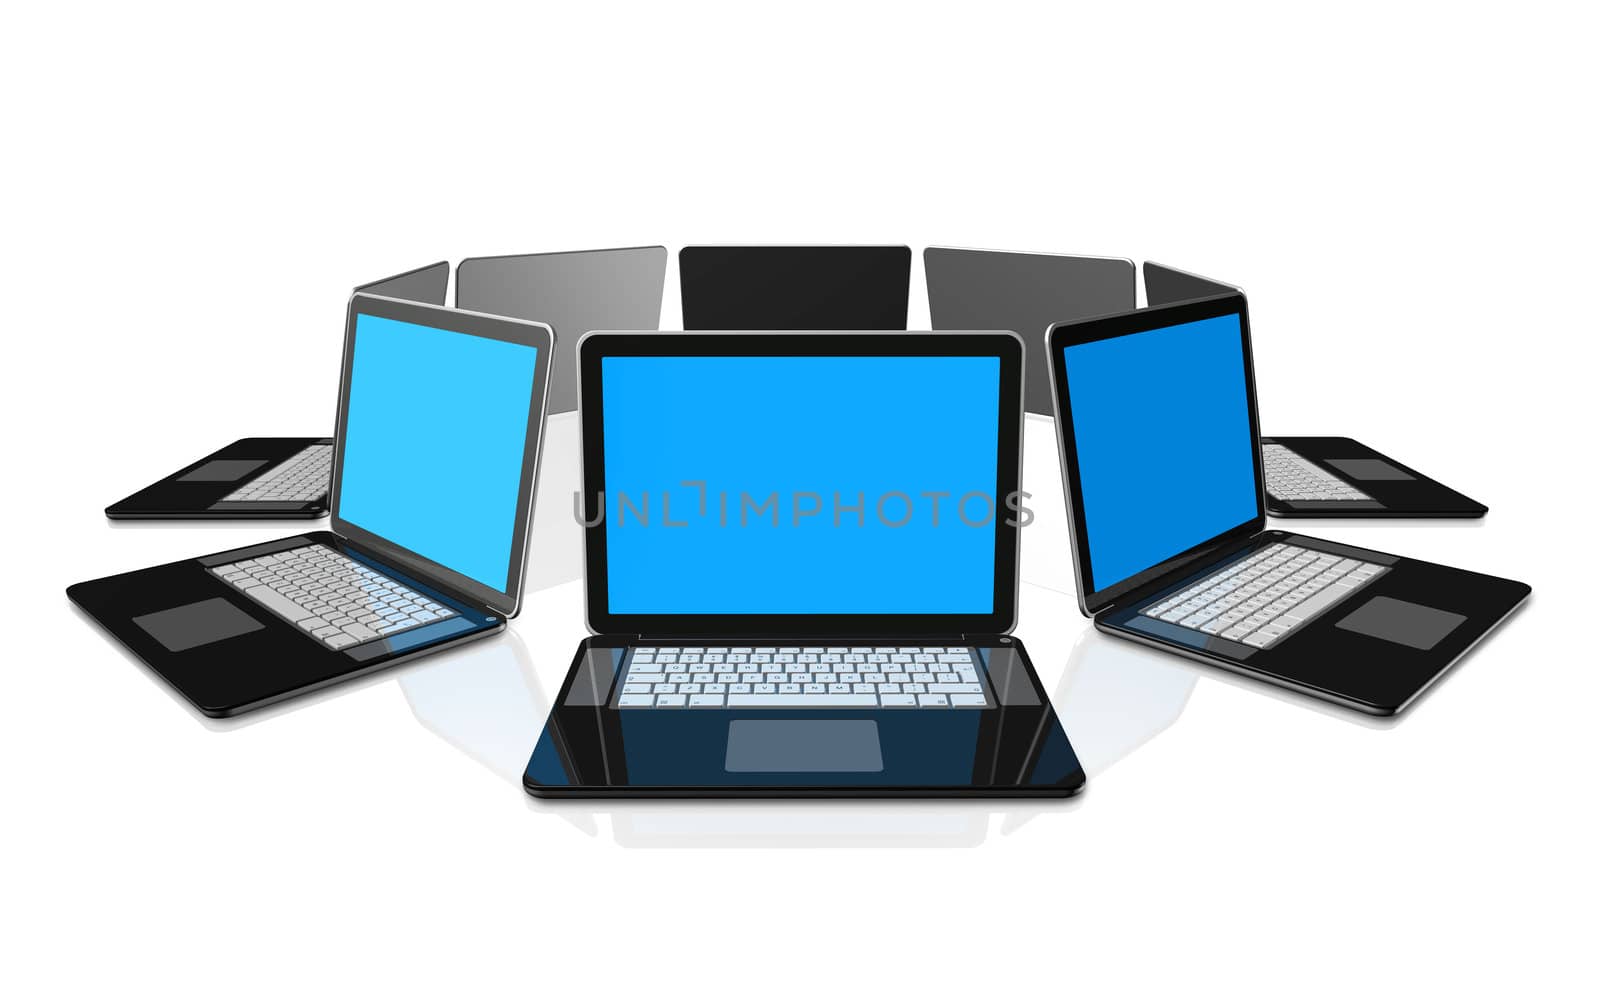 3D black laptop computers isolated on white